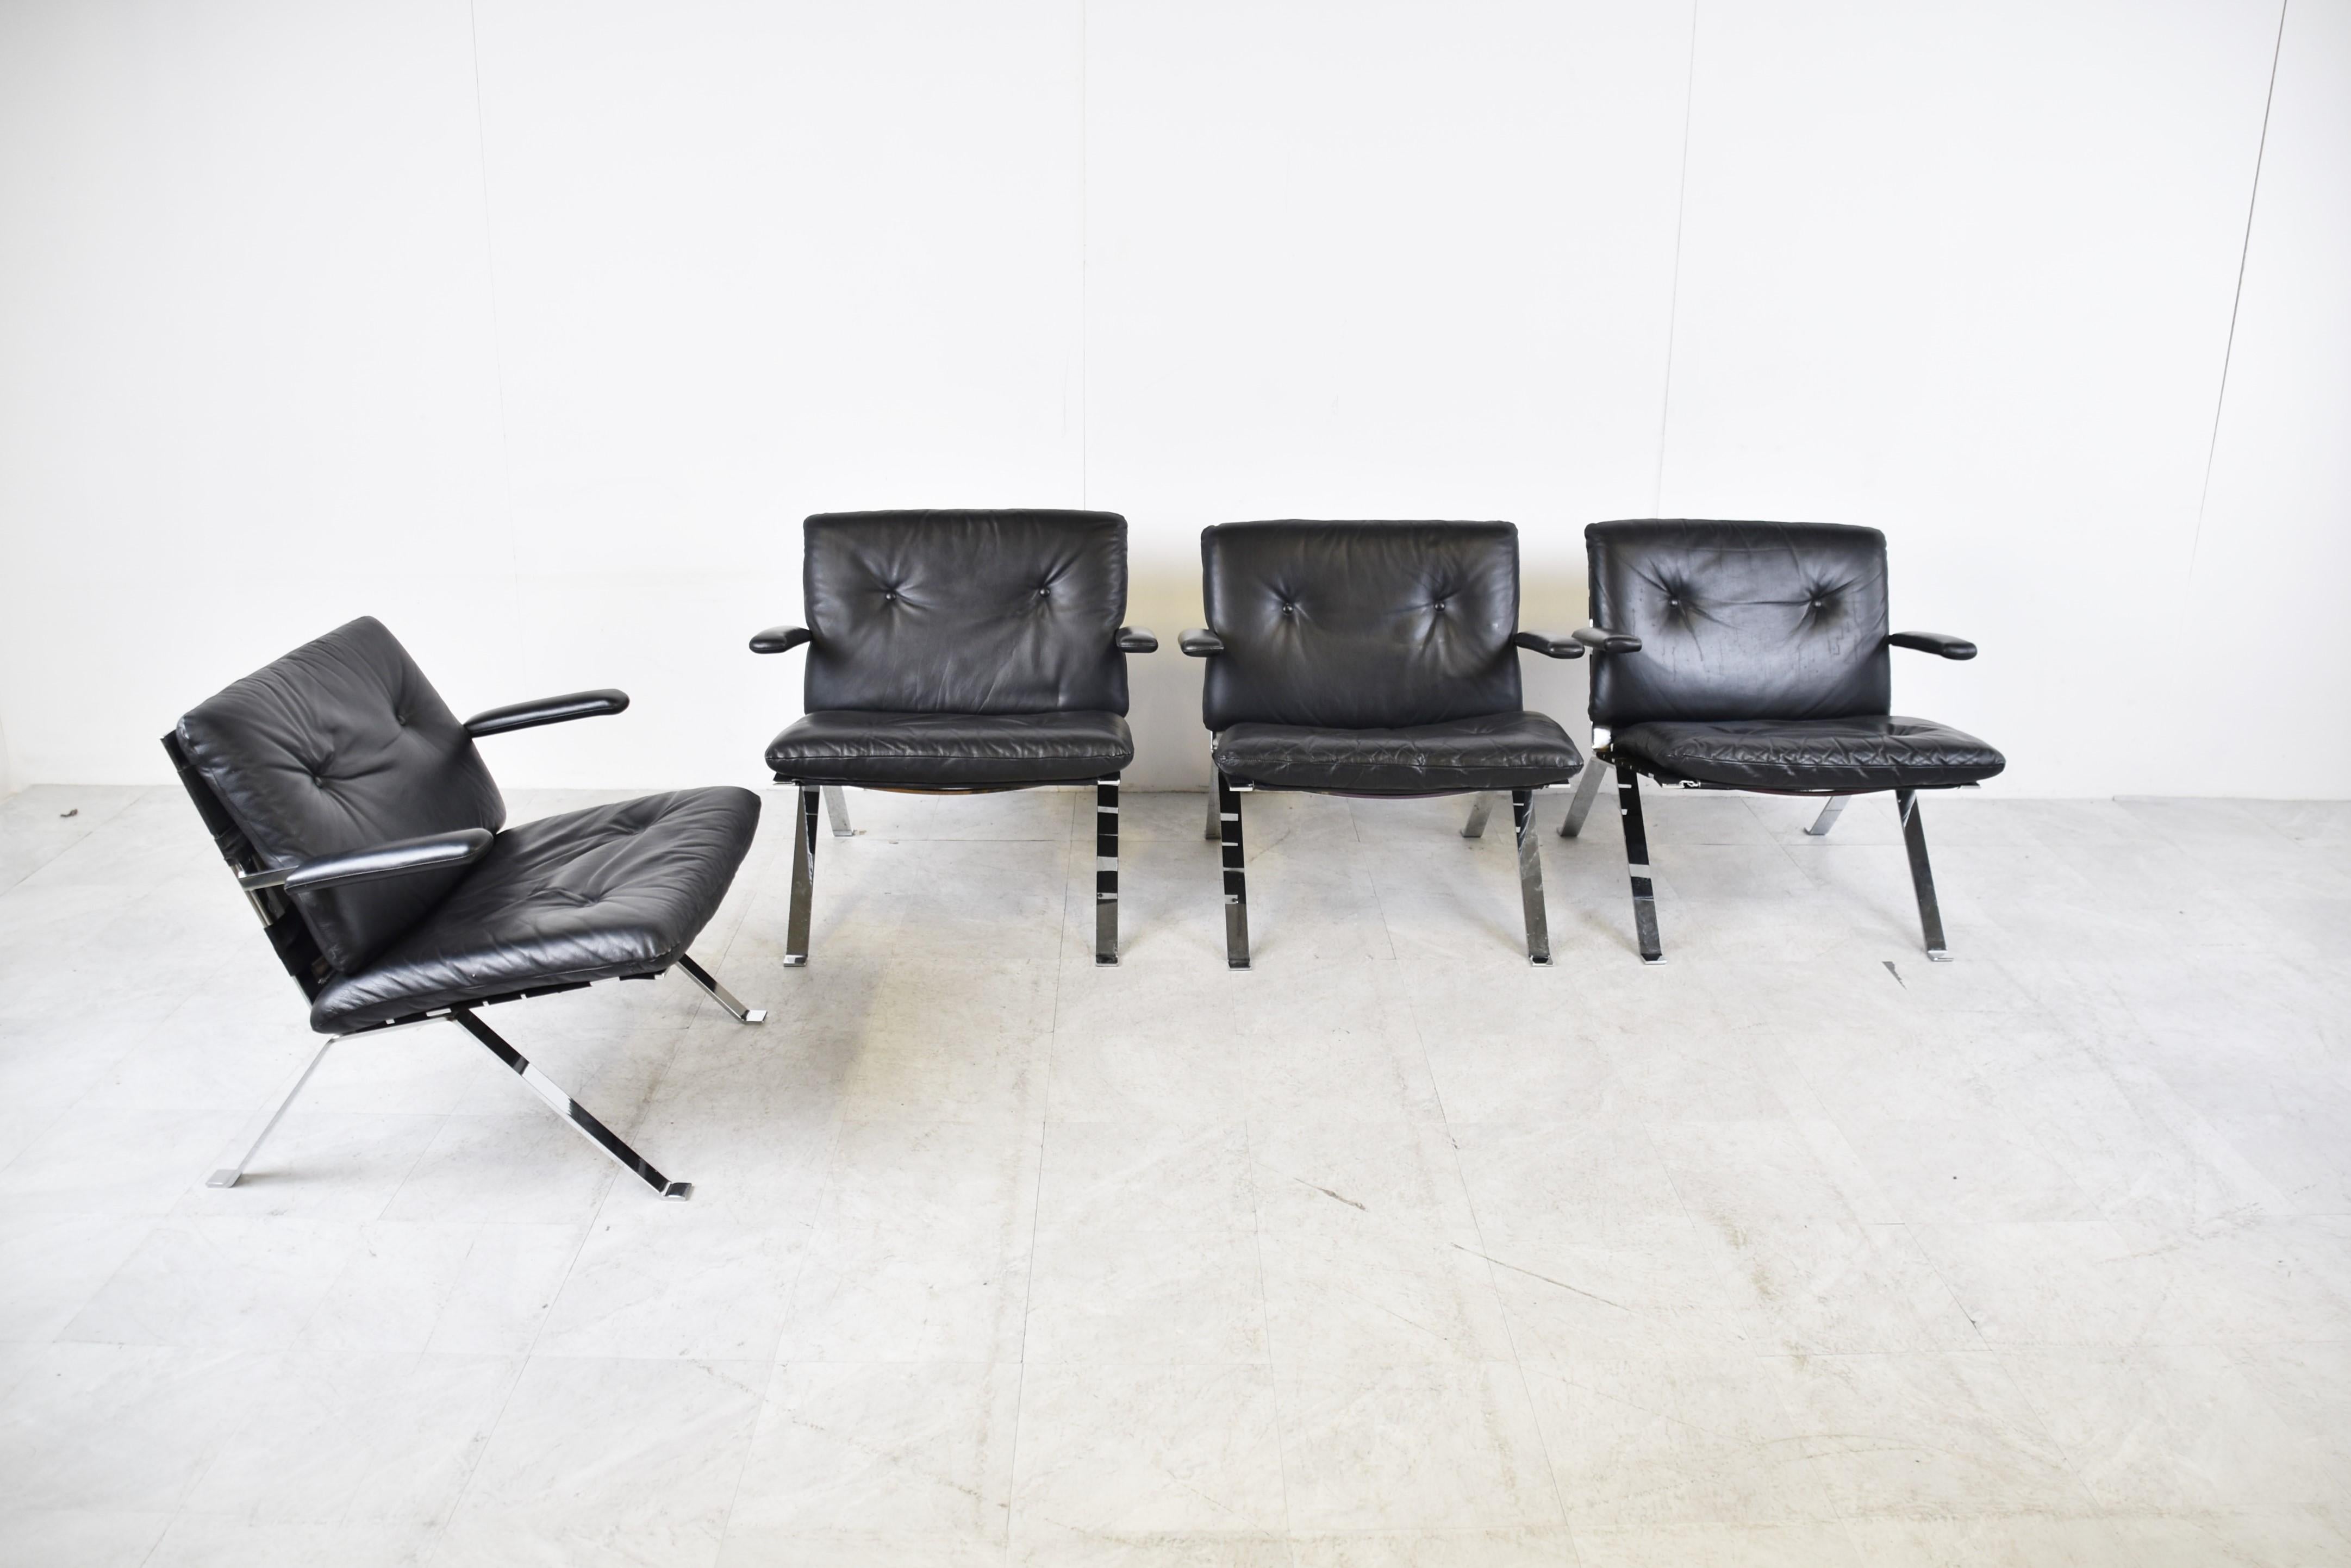 Set of 4 Leather Lounge Chairs Model 1600 by Hans Eichenberger for Girsberg.

Leather seats, amrests and backrests and a chromed steel frame.

Very comfortable lounge chairs with a timeless design.

1960s - Switzerland

Very good